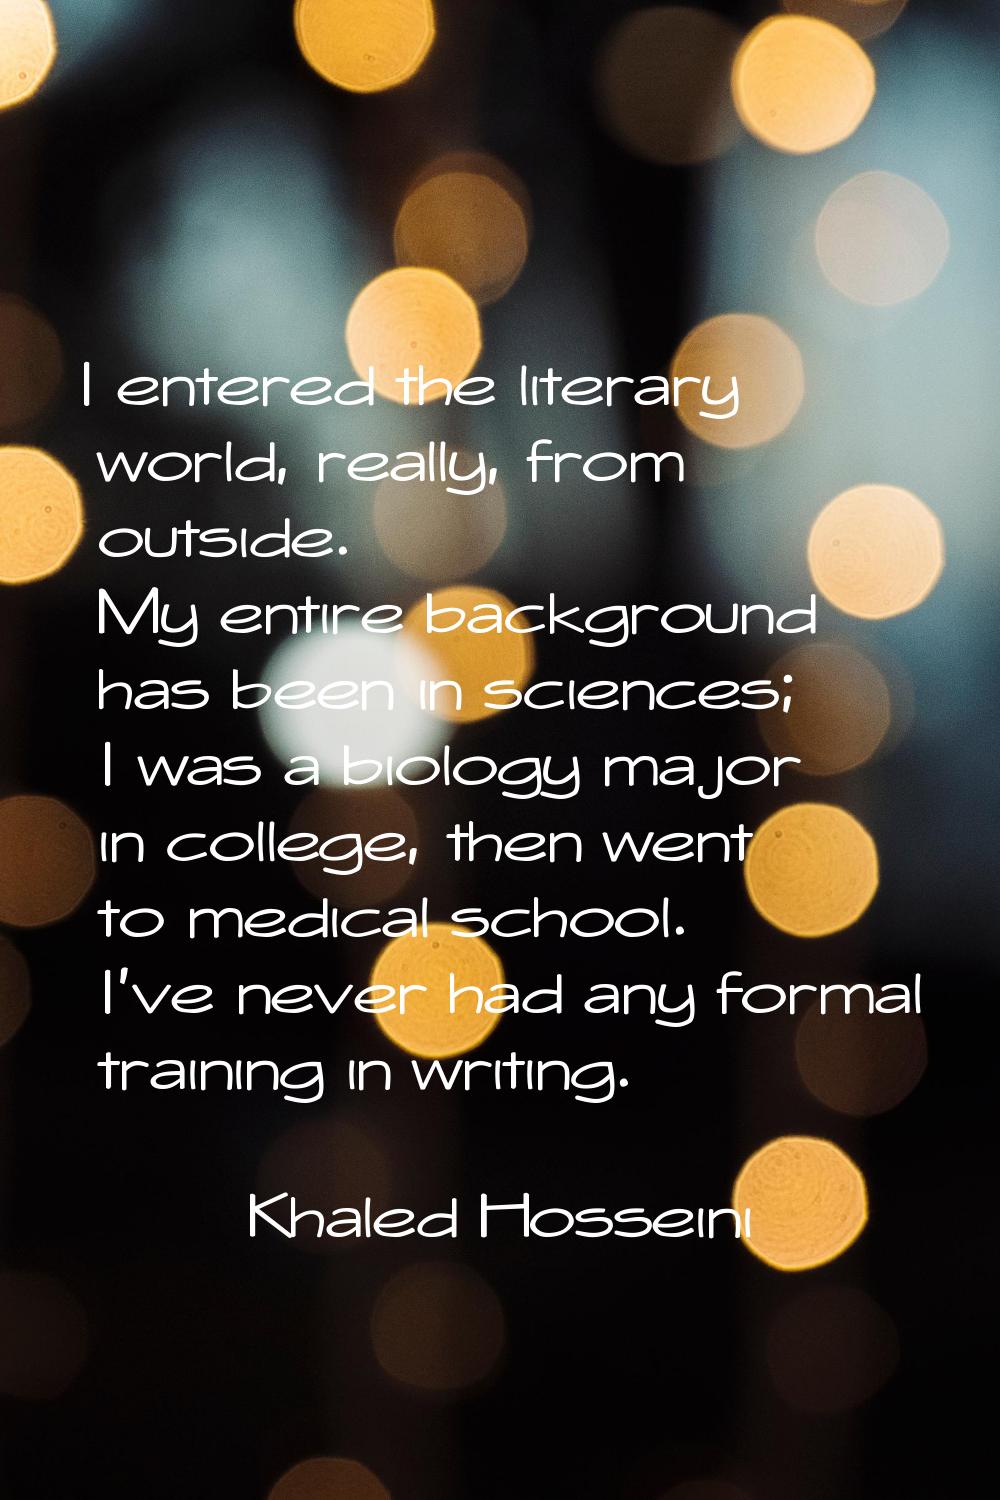 I entered the literary world, really, from outside. My entire background has been in sciences; I wa